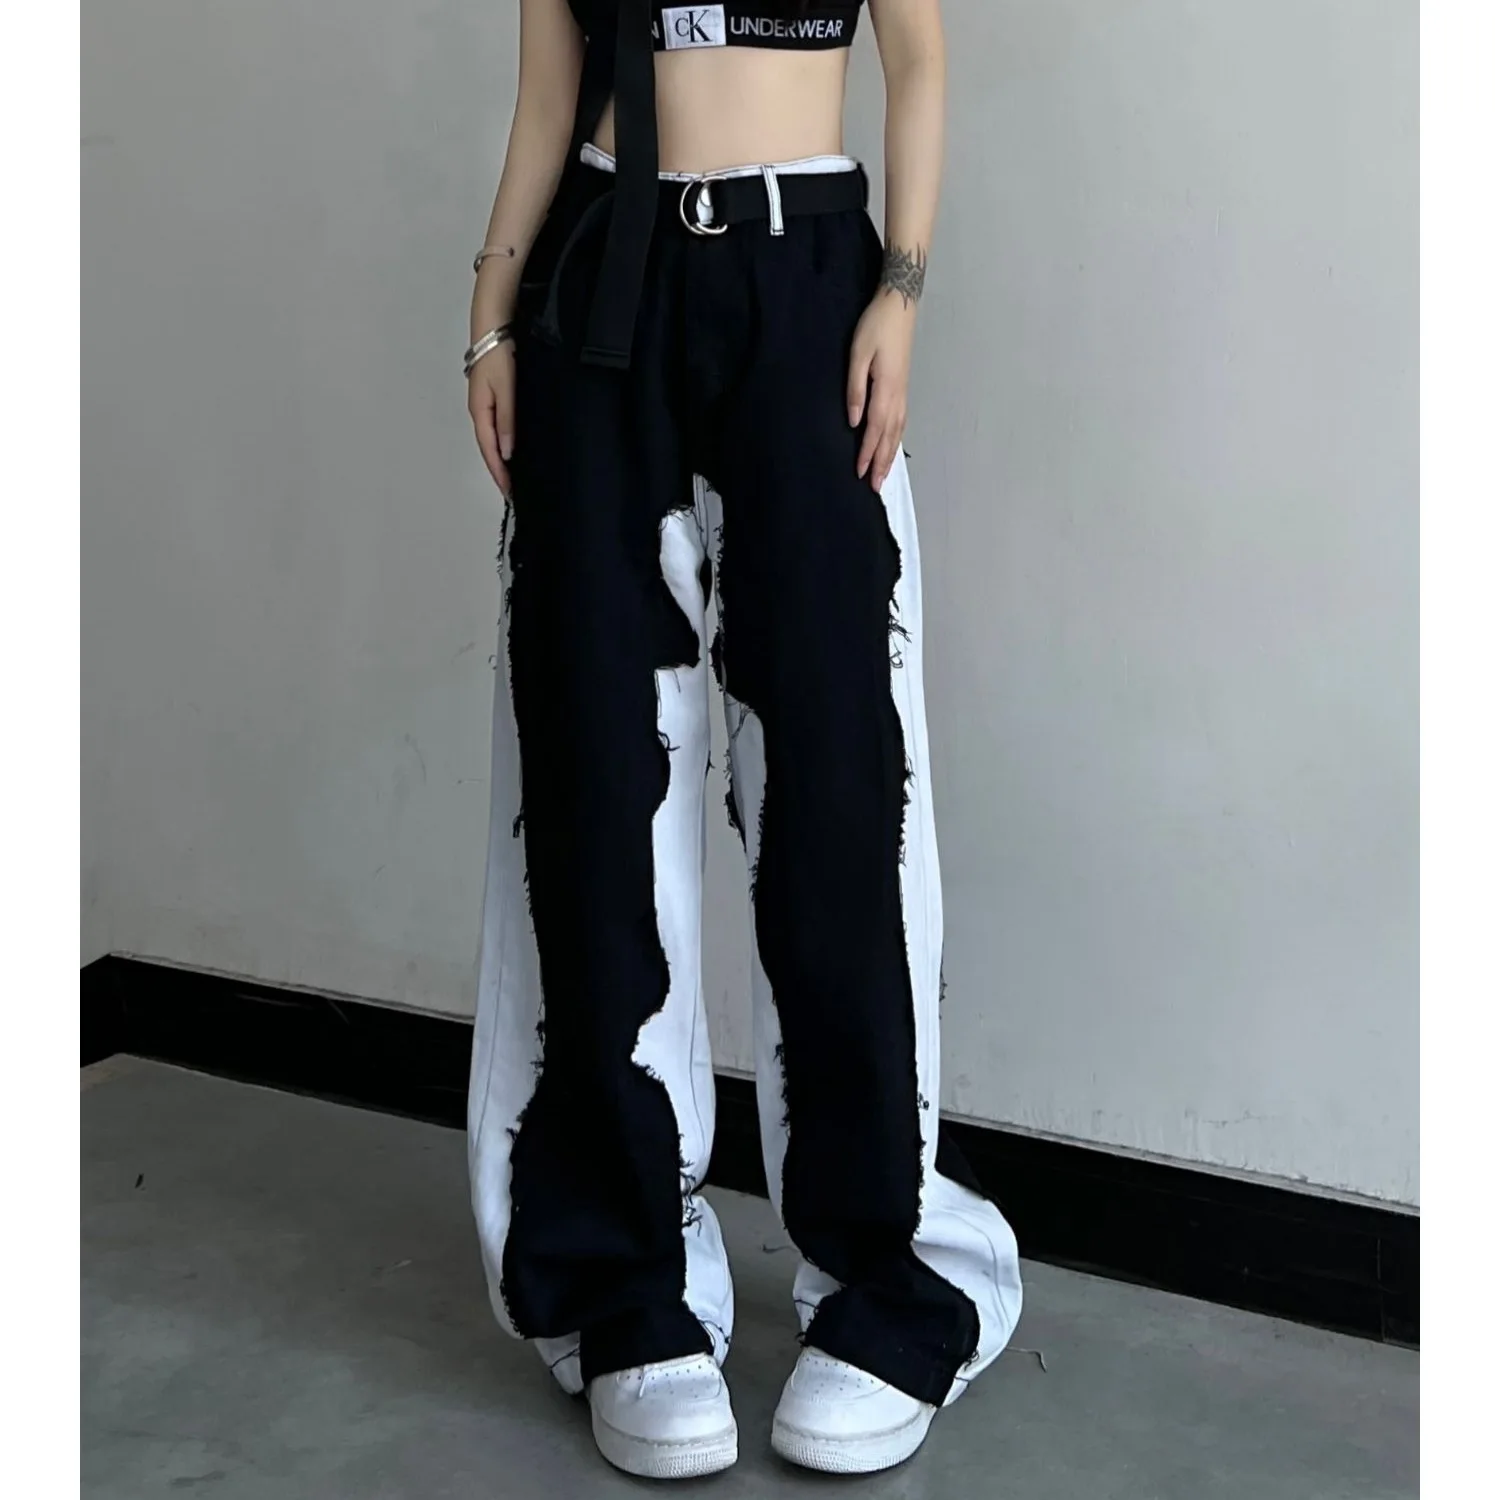 Y2k Vintage Women Splicing Jeans Streetwear Fashion Cootrast Color Pants Oversize Loose Casual Straight Wide Leg Trousers 2023